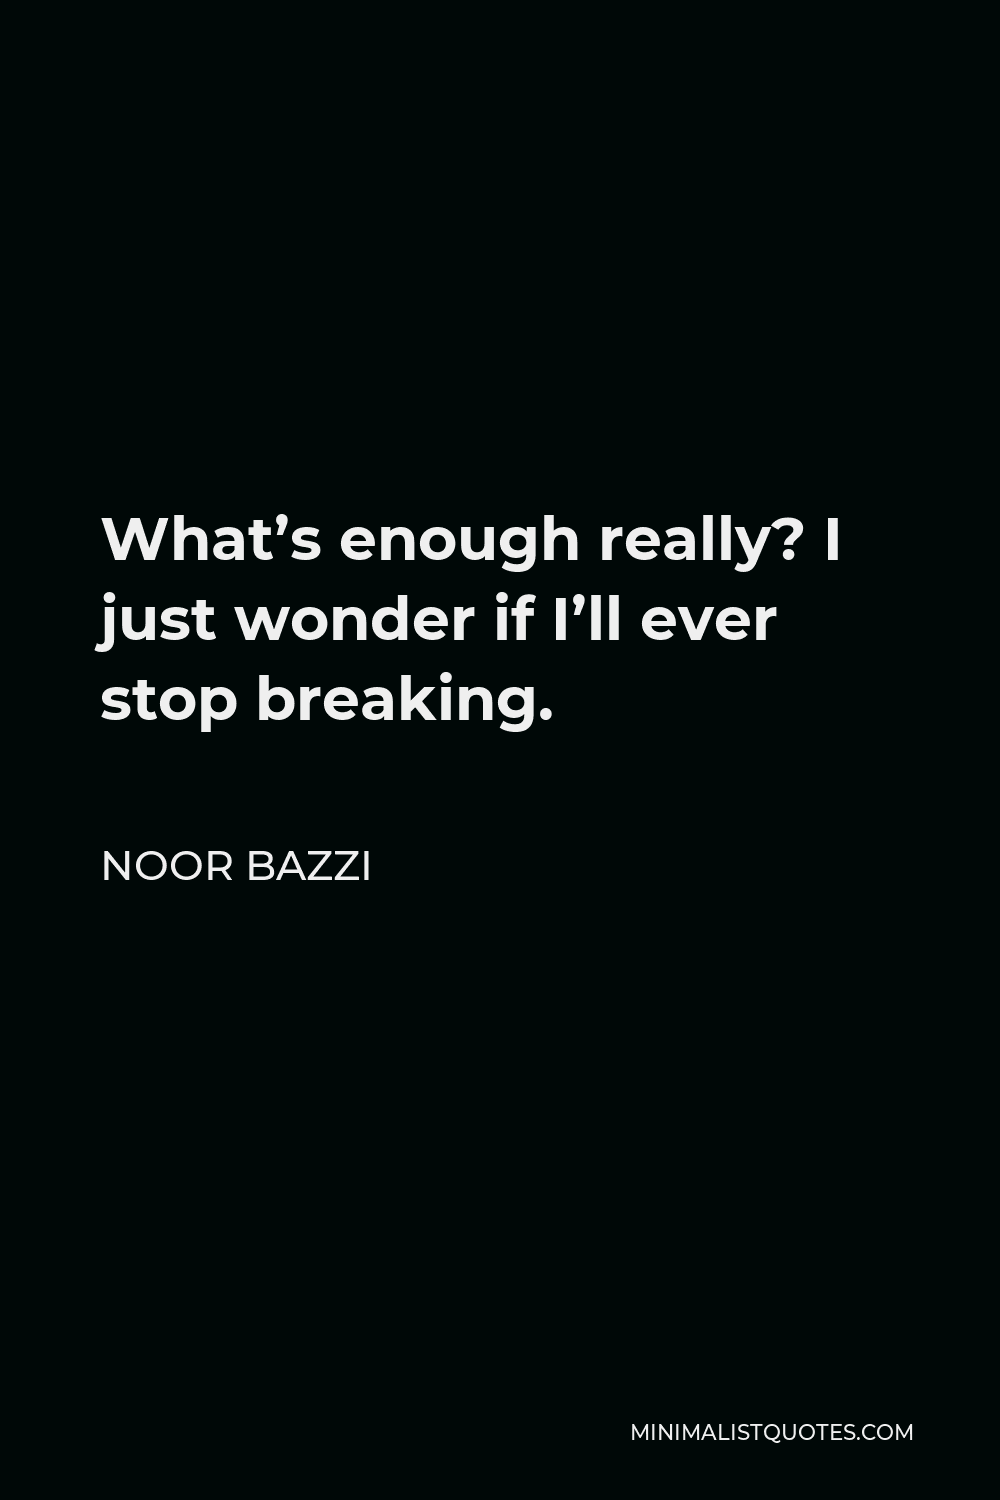 Noor Bazzi Quote - What’s enough really? I just wonder if I’ll ever stop breaking.